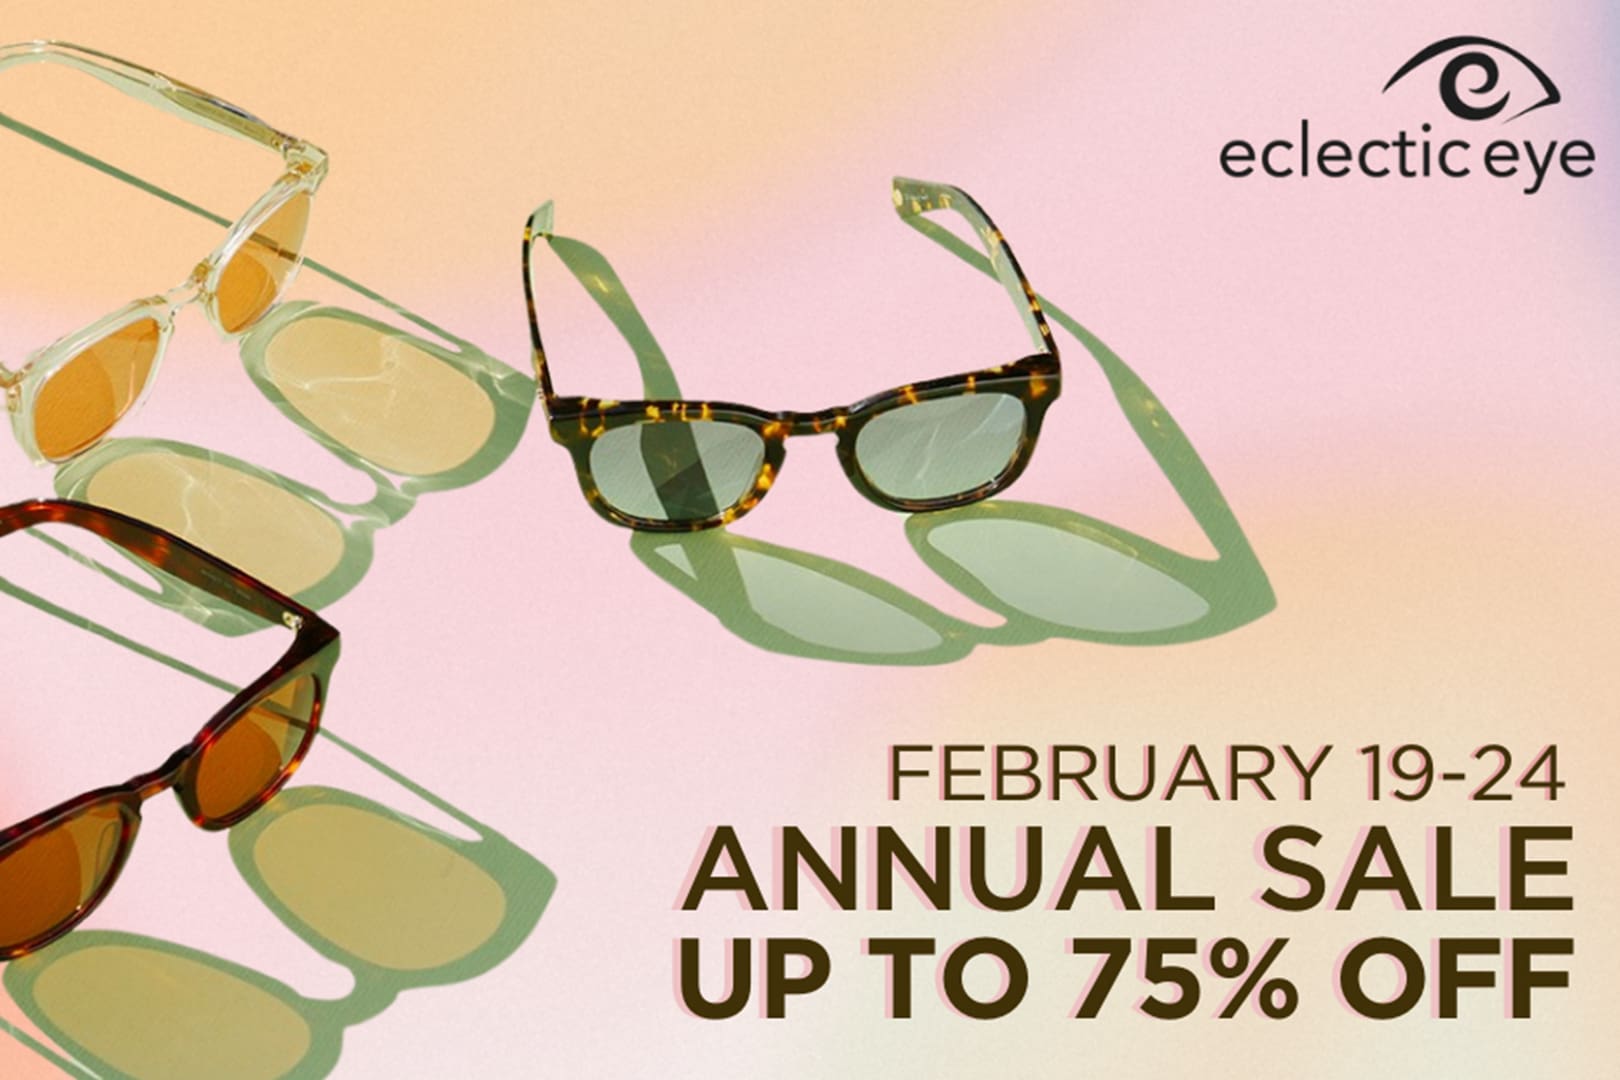 Annual Sale - up to 75% off February 19-24